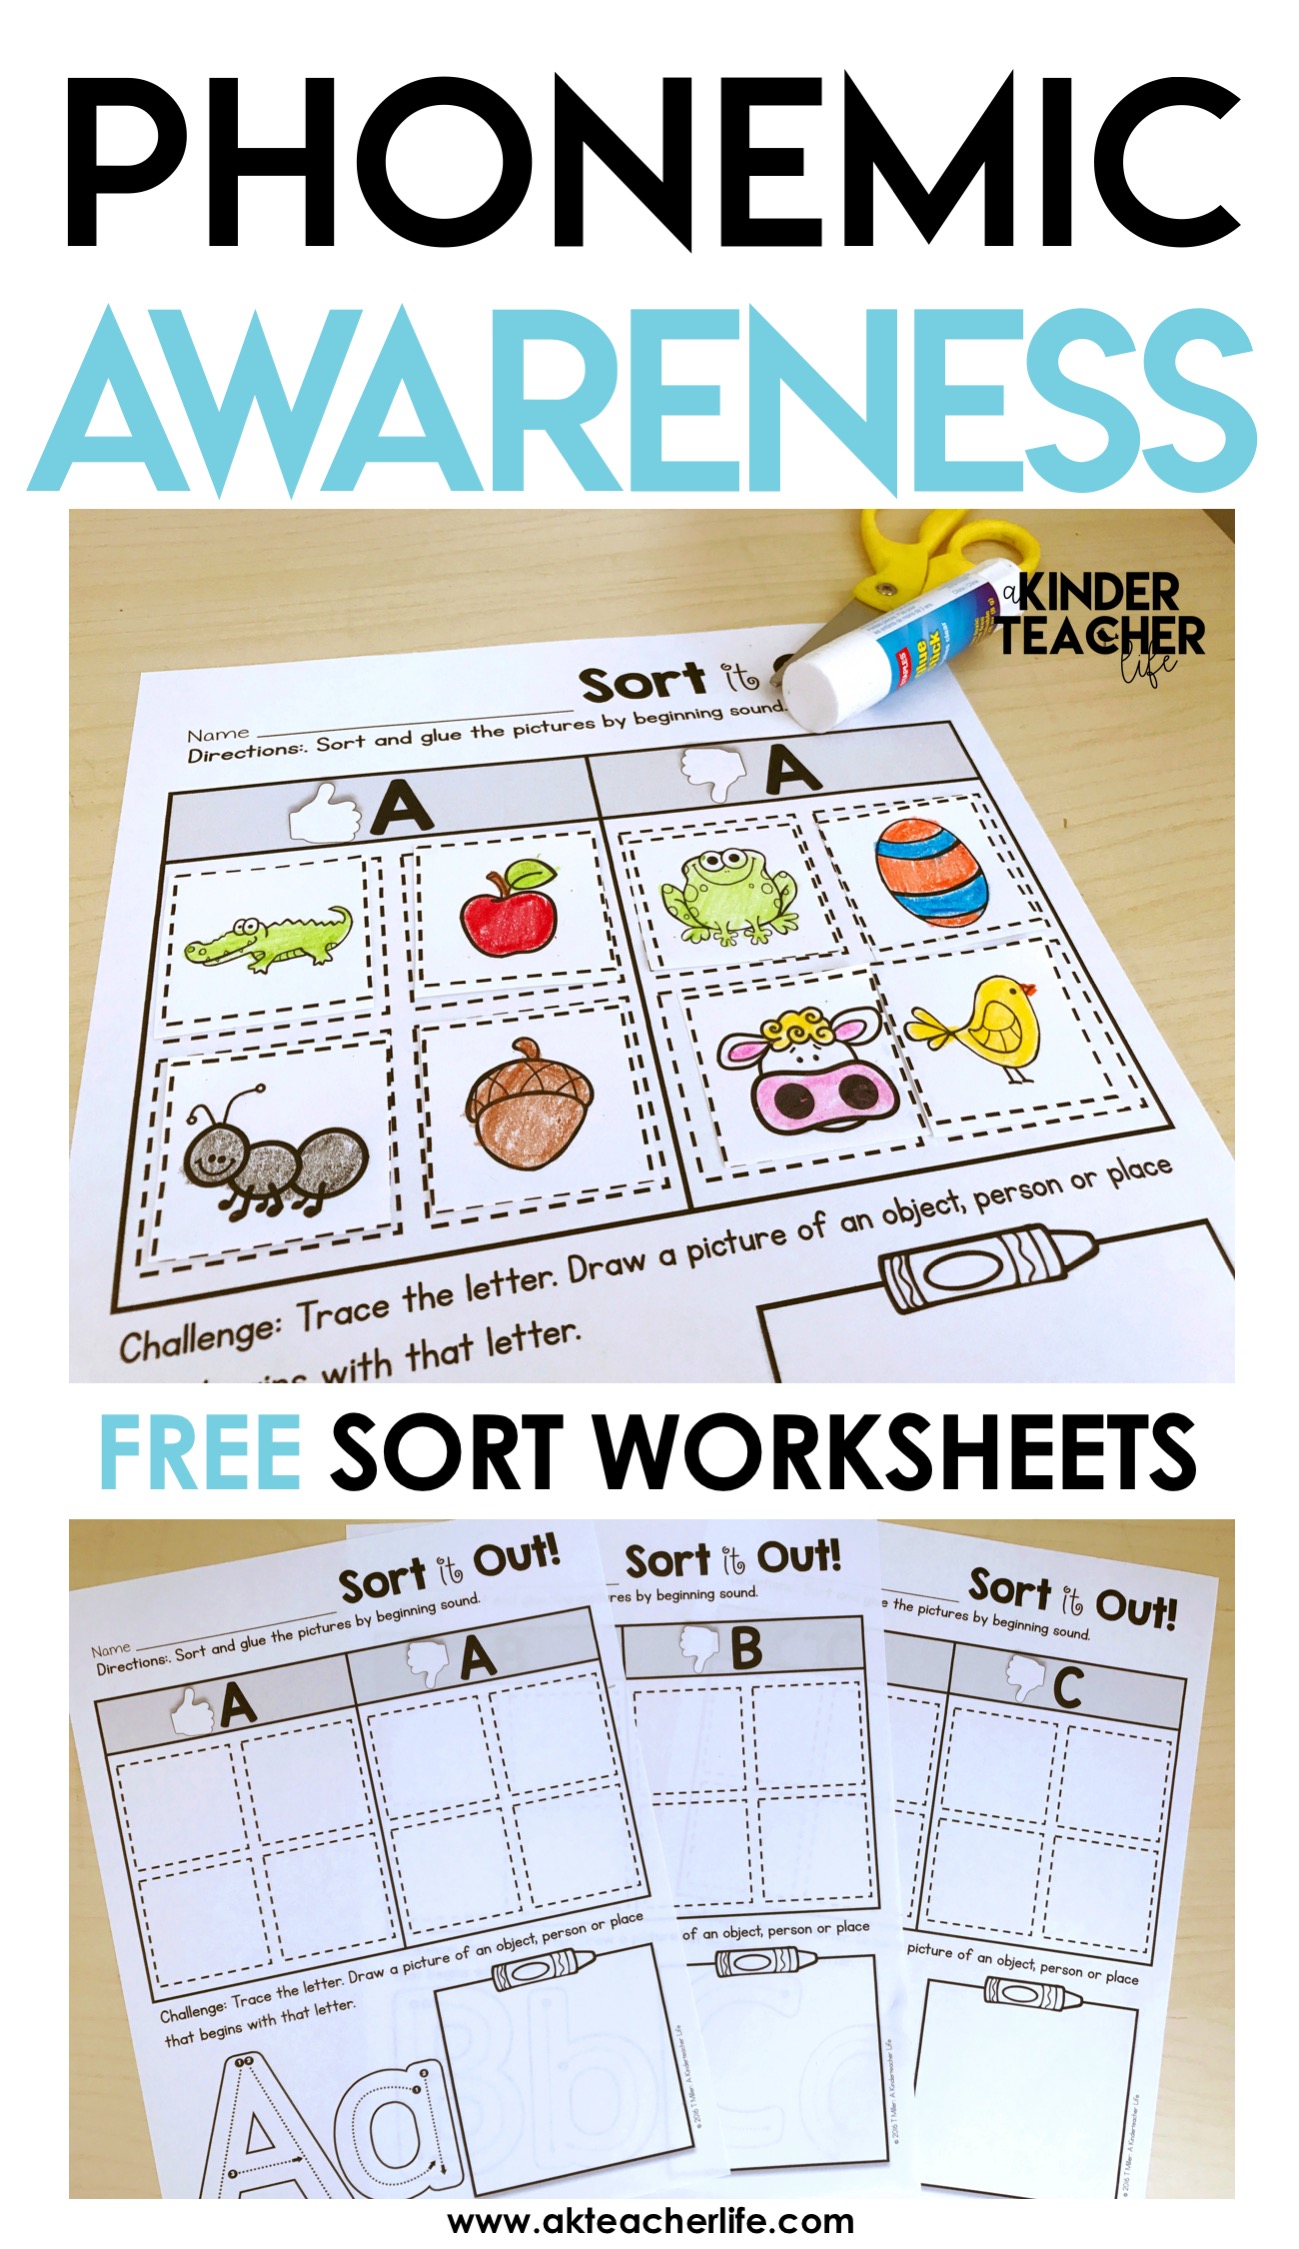 What Are Some Free Teaching Worksheets?